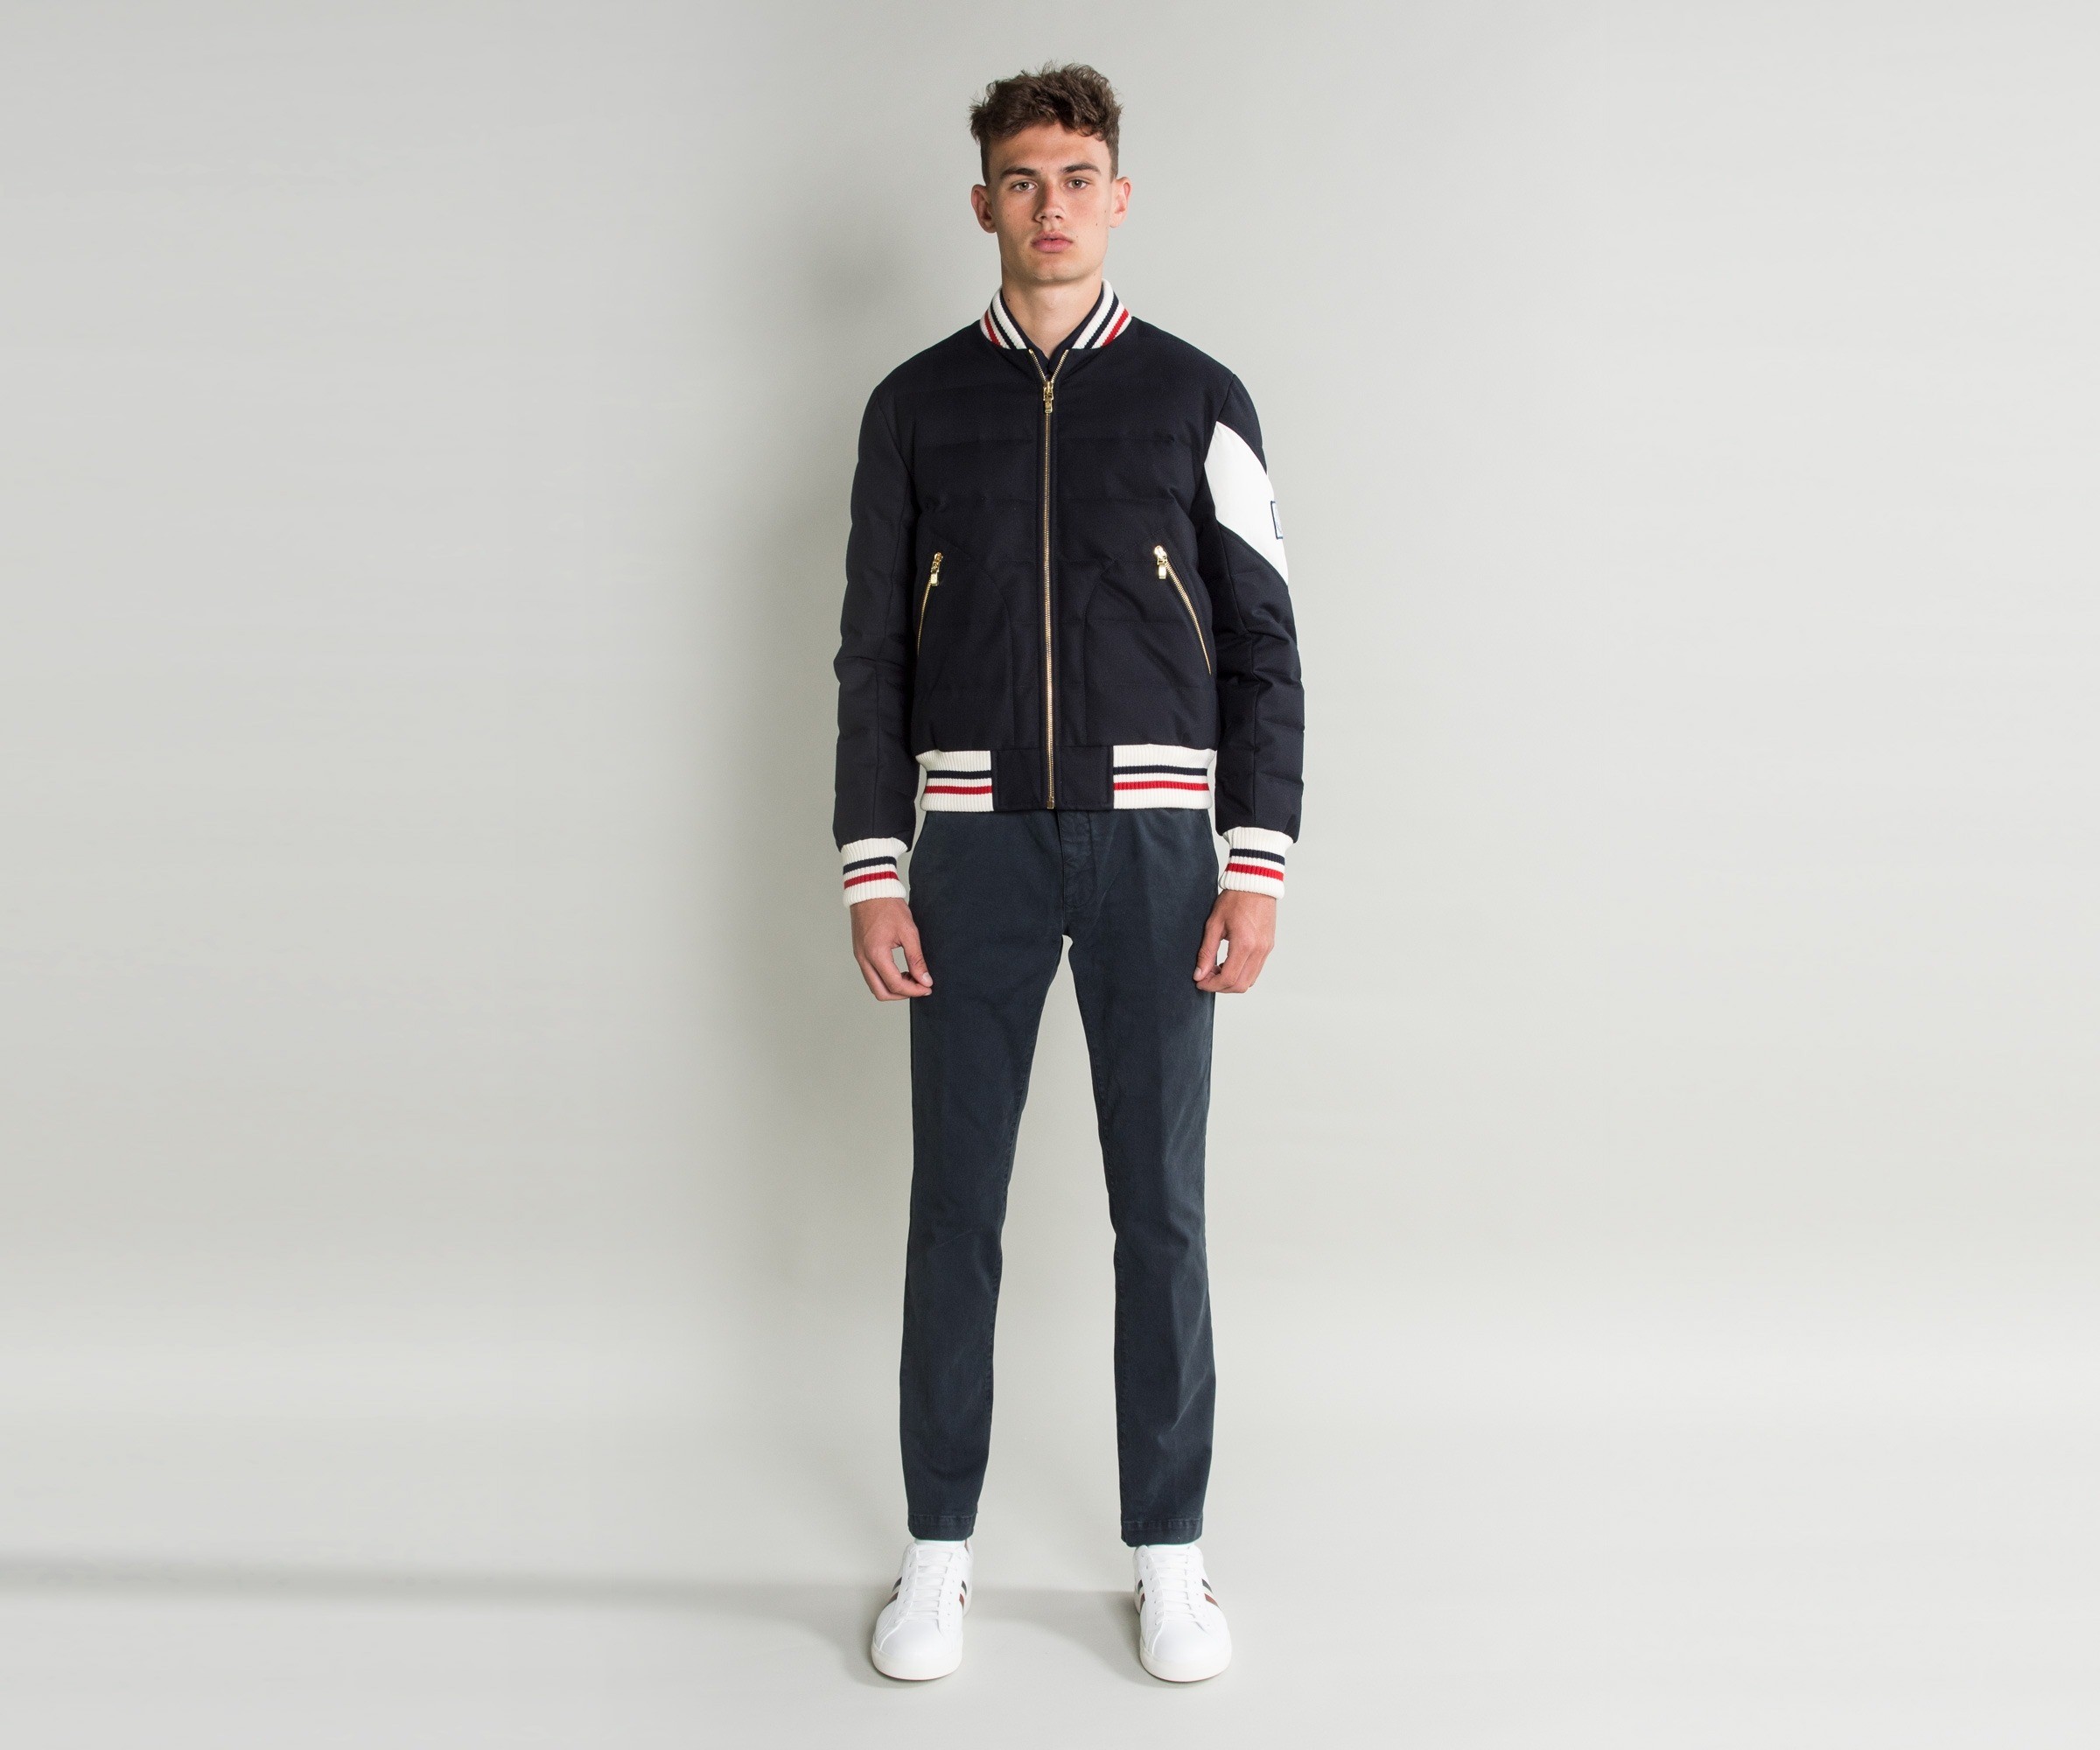 Moncler Gamme Bleu 'Giubbotto' Quilted Bomber Jacket Navy